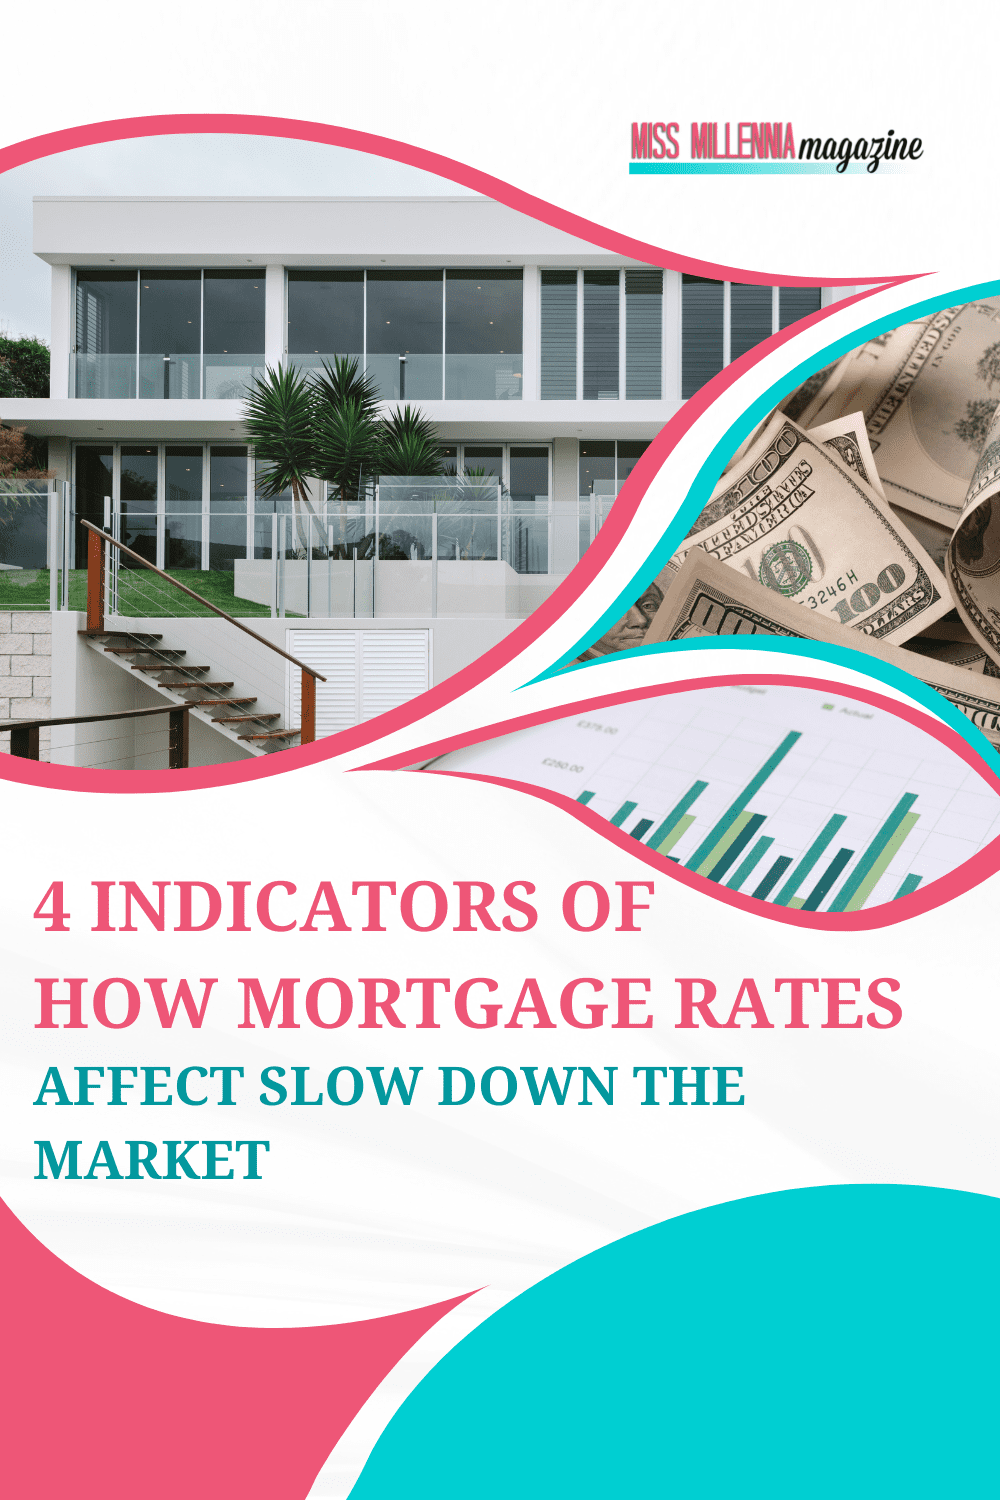 4 Indicators of How Mortgage Rates Affect Slow Down the Market